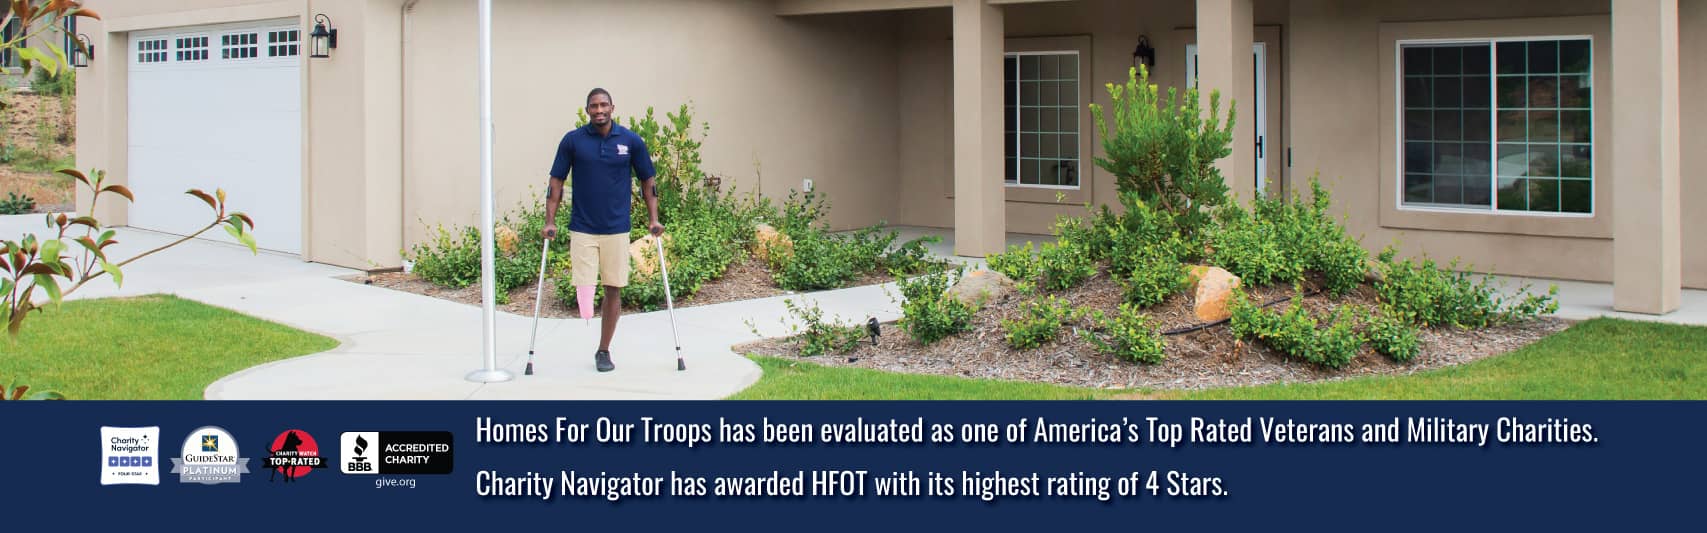 HFOT receives 4 star rating from Charity Navigator.